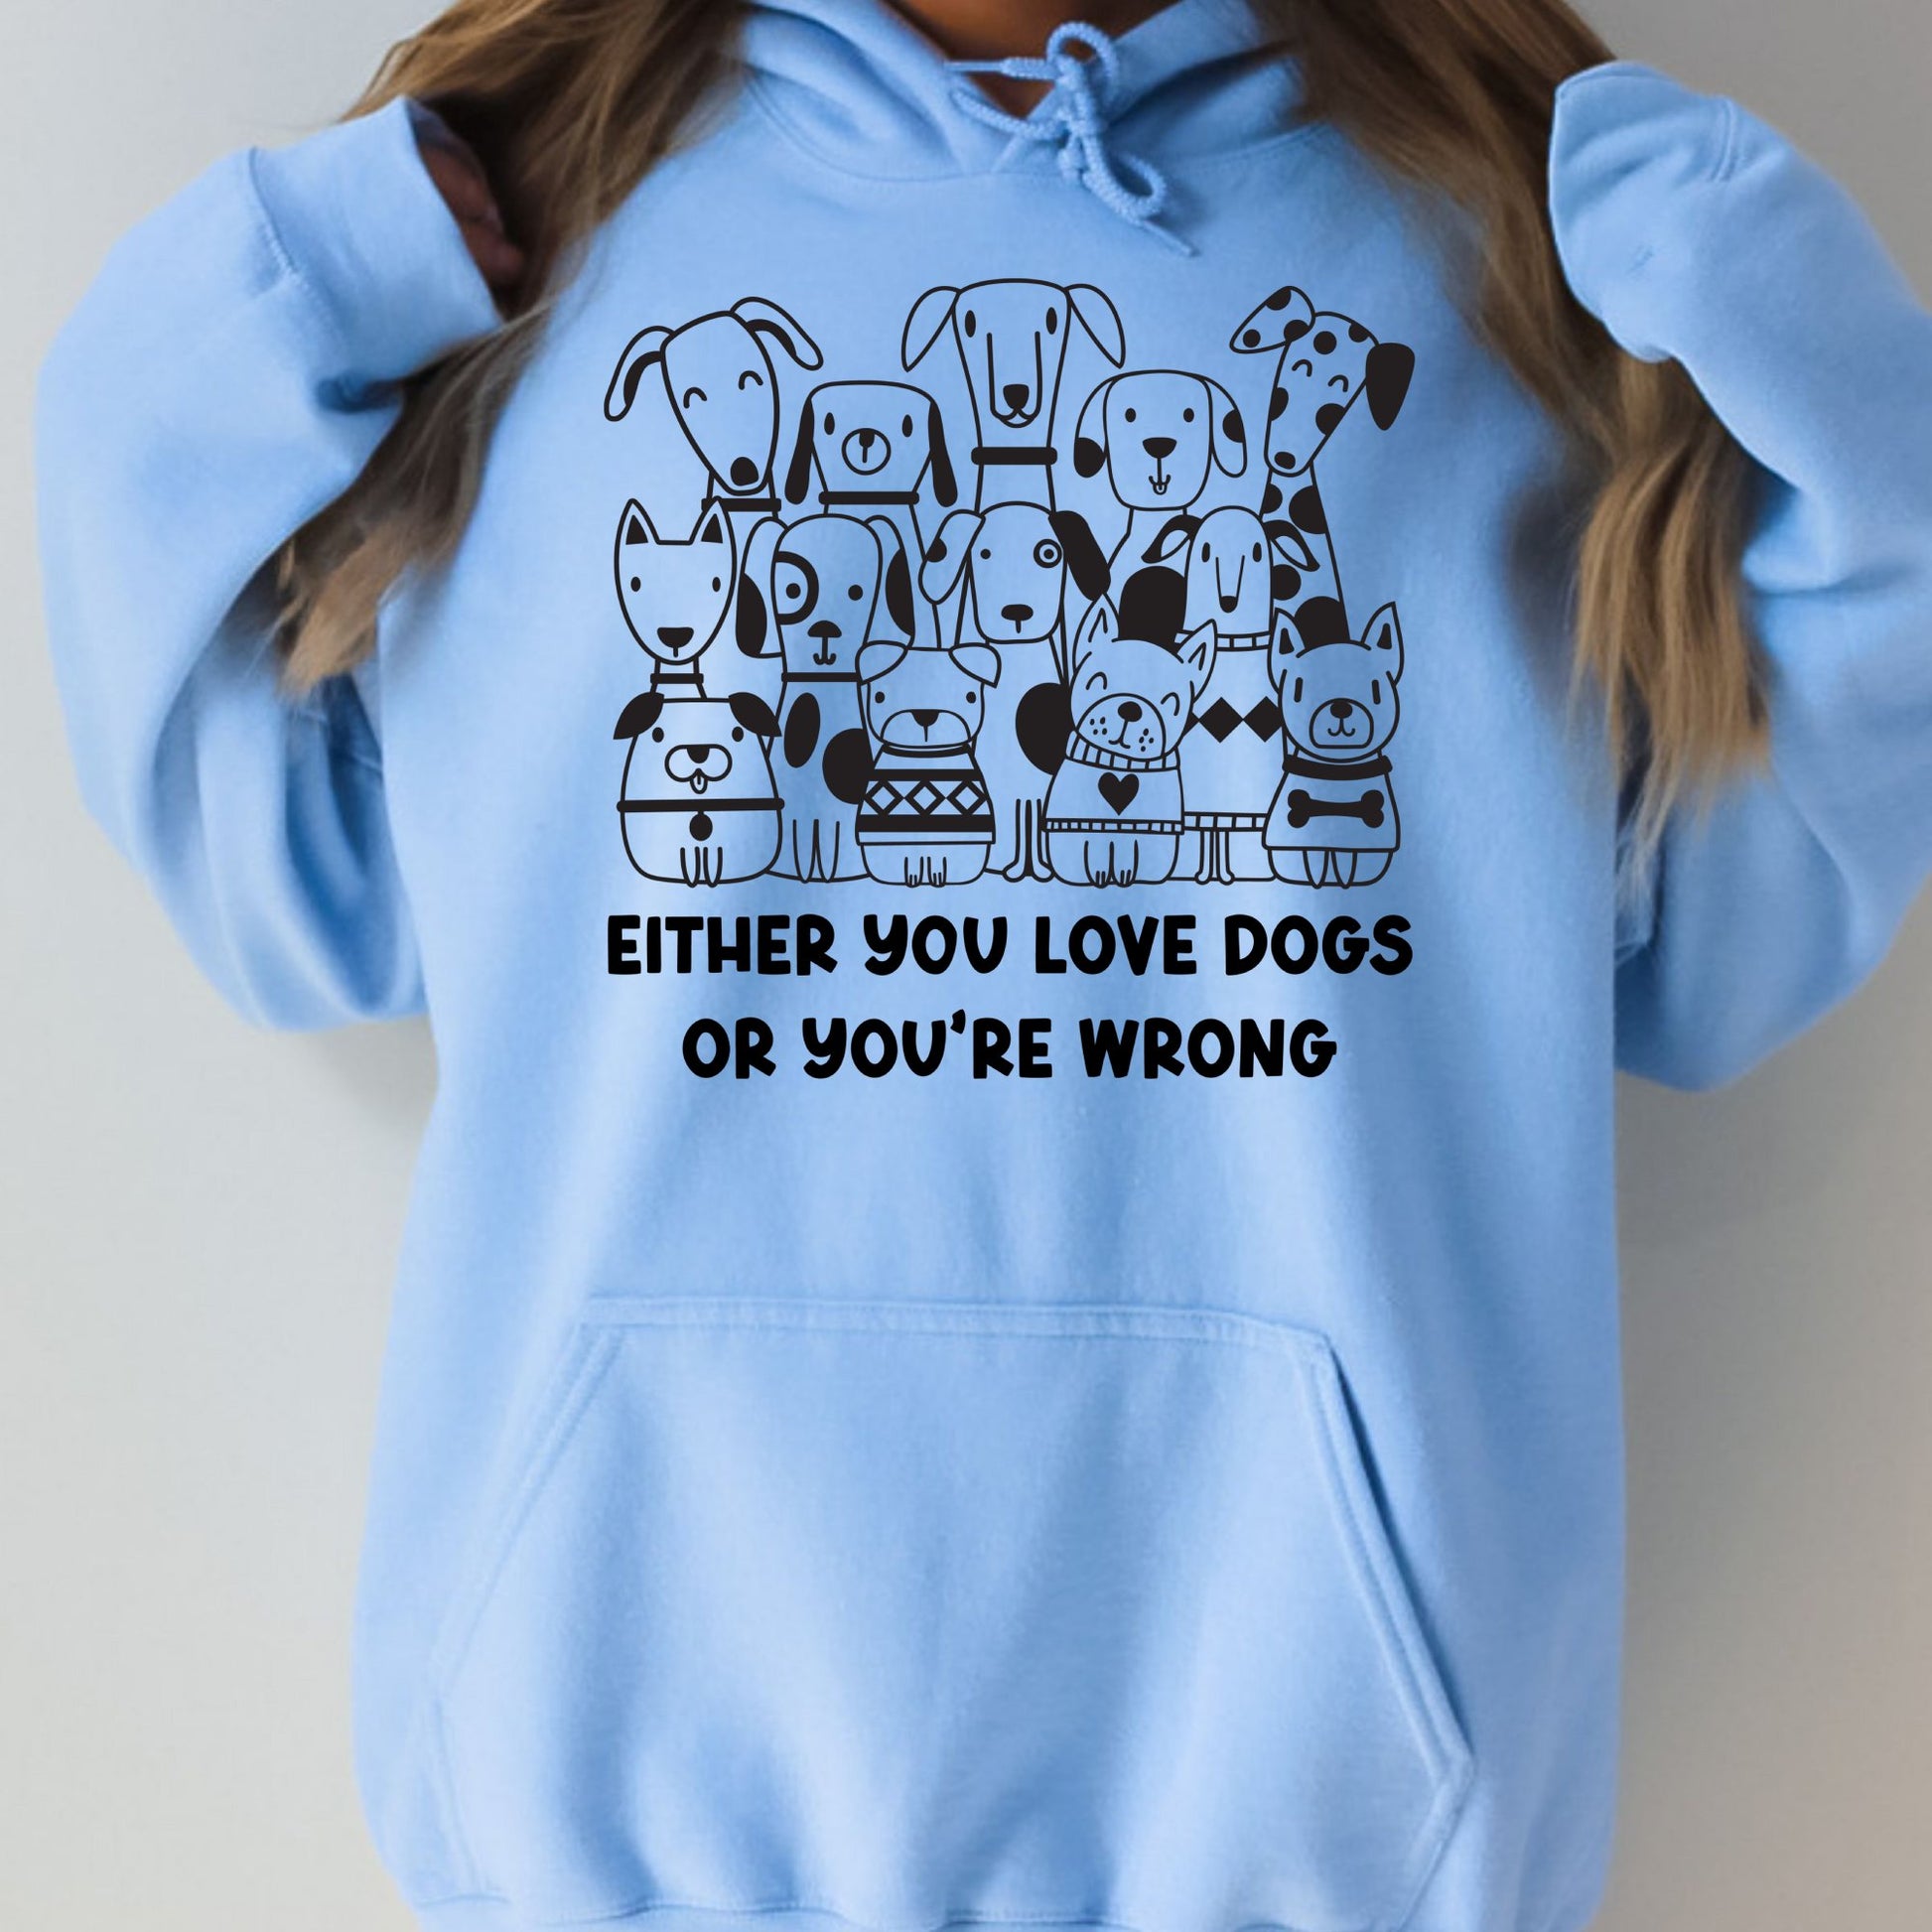 Either You Love Dogs or You're Wrong Hoodie Sweatshirt - PuppyJo Hoodie S / Light Blue